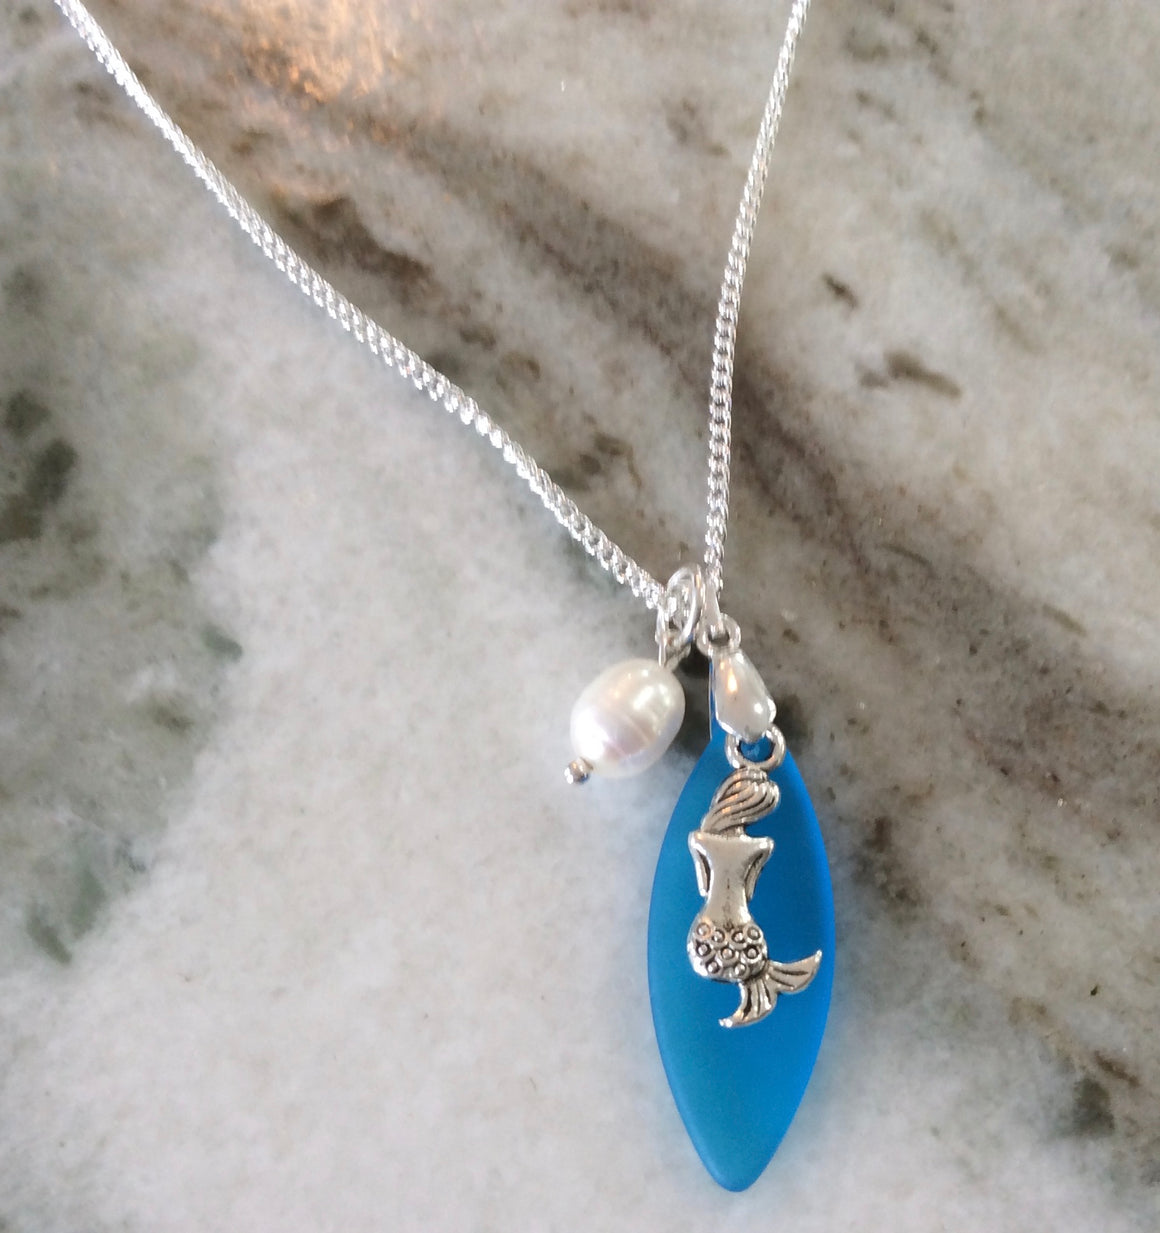 Mermaid Jewelry Pearl Necklace Blue Sea Glass Necklace Seaglass Jewelry Nautical Beach Glass Sterling Silver Necklace